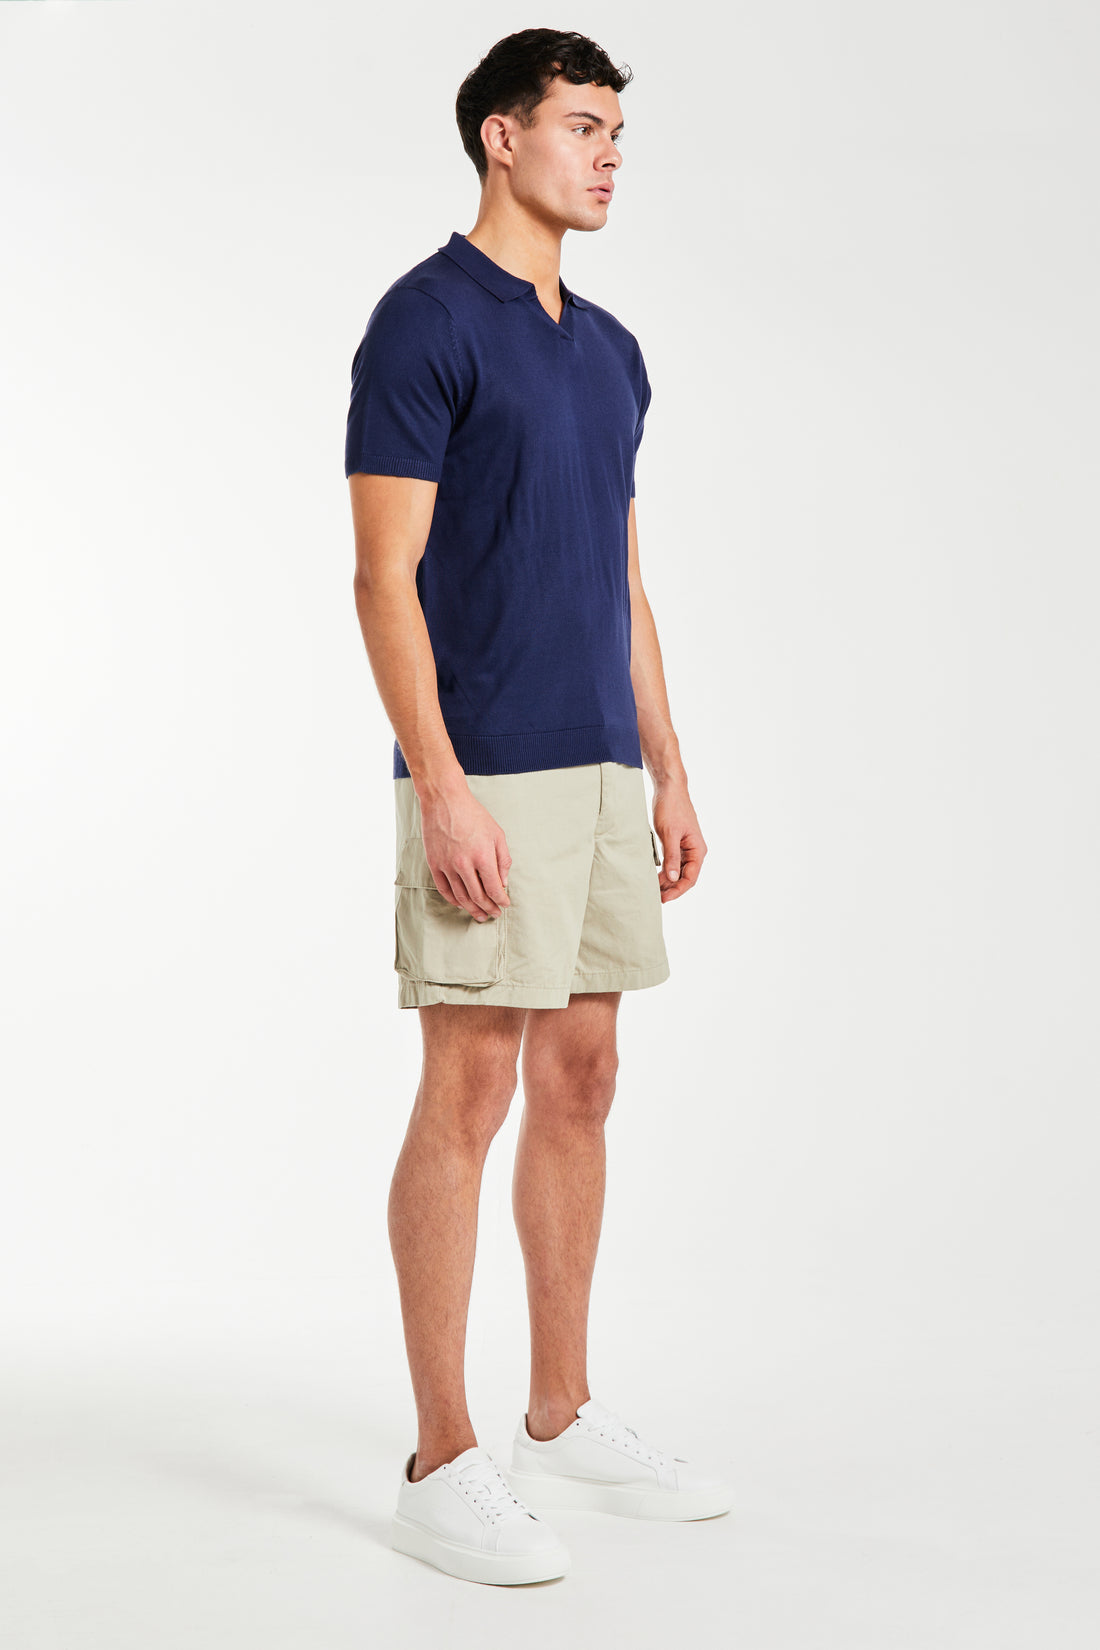 men's utility shorts in oatmeal with blue polo